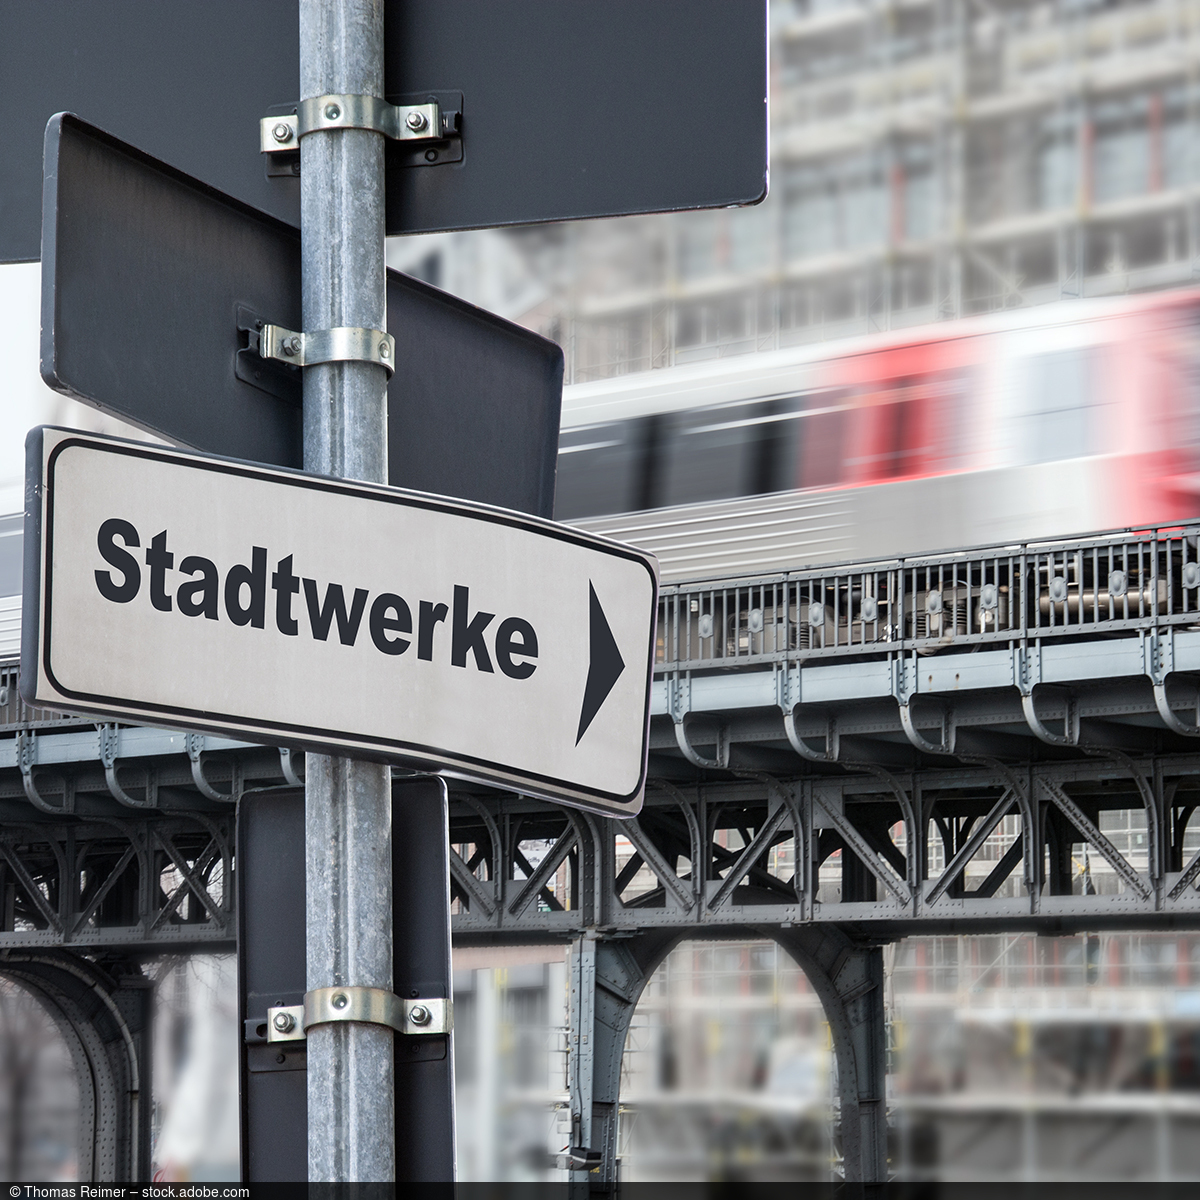 A street sign with "Stadtwerke" written on it and a train driving past in the background.